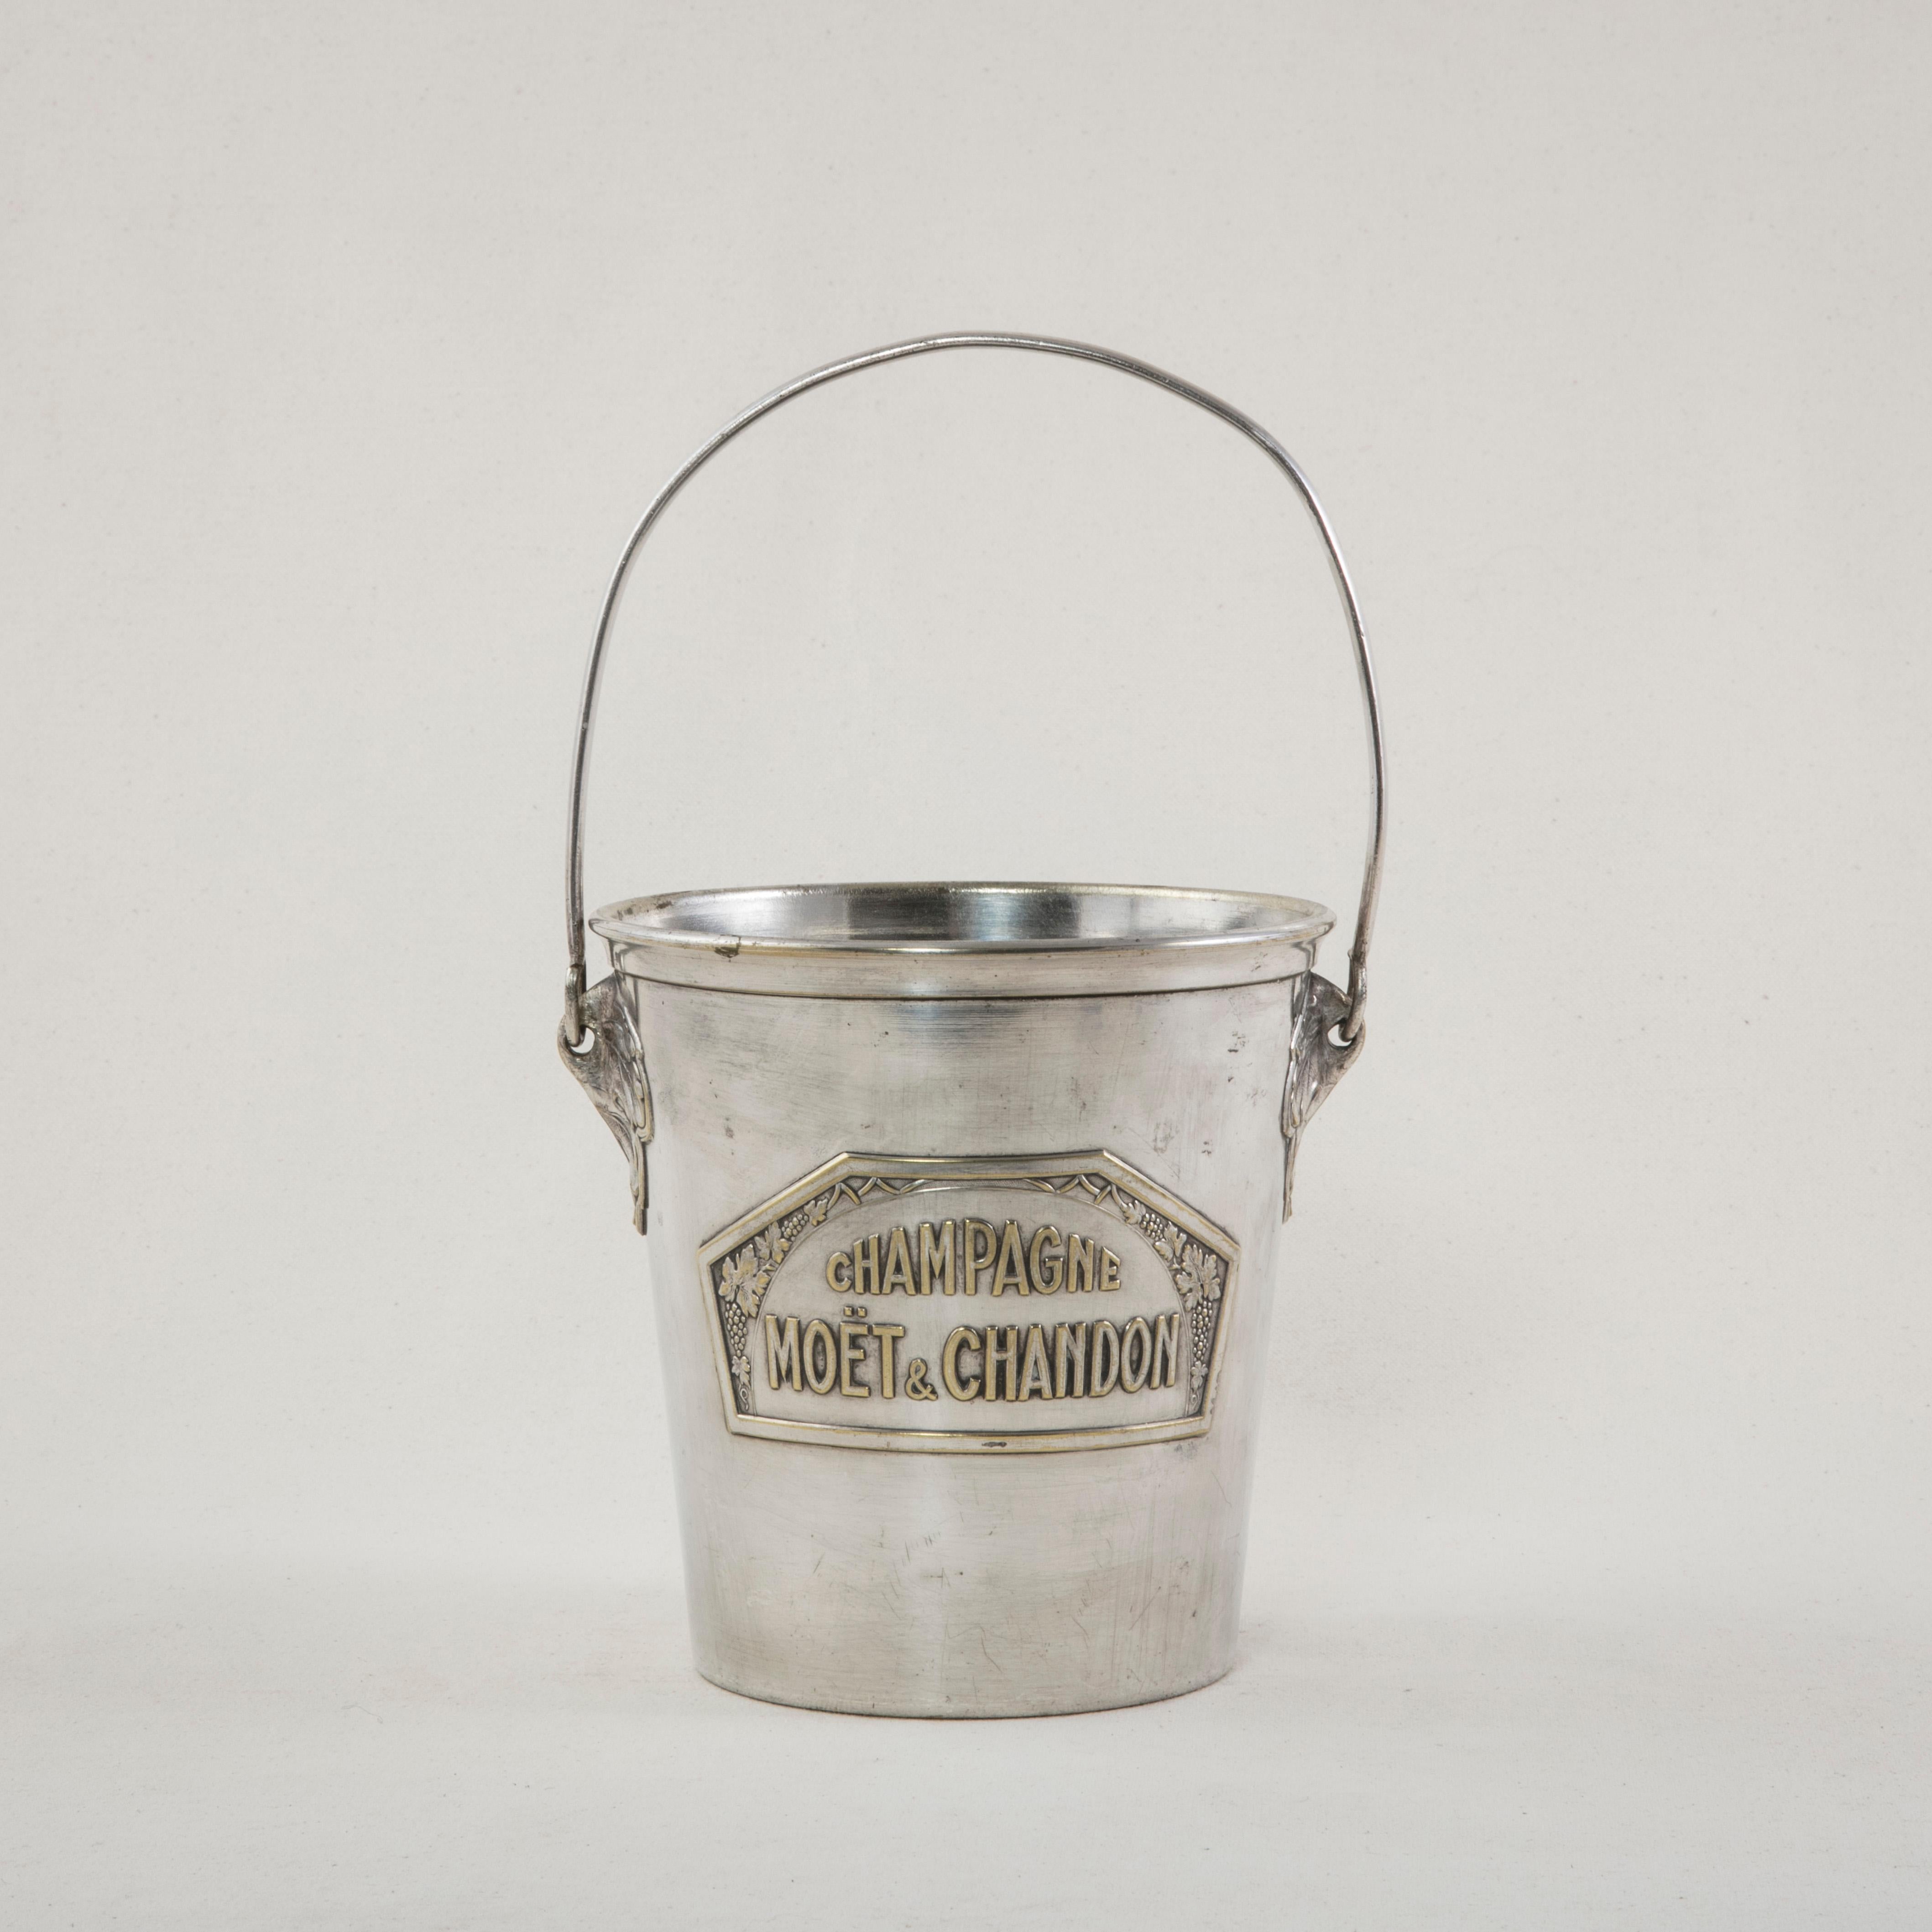 This small scale silver plate ice bucket with handle is from the 1930s and features an Art Deco motif surrounding the renown French champagne name of Moet et Chandon. It is stamped on the bottom Argit Paris. A charming champagne bucket ready to